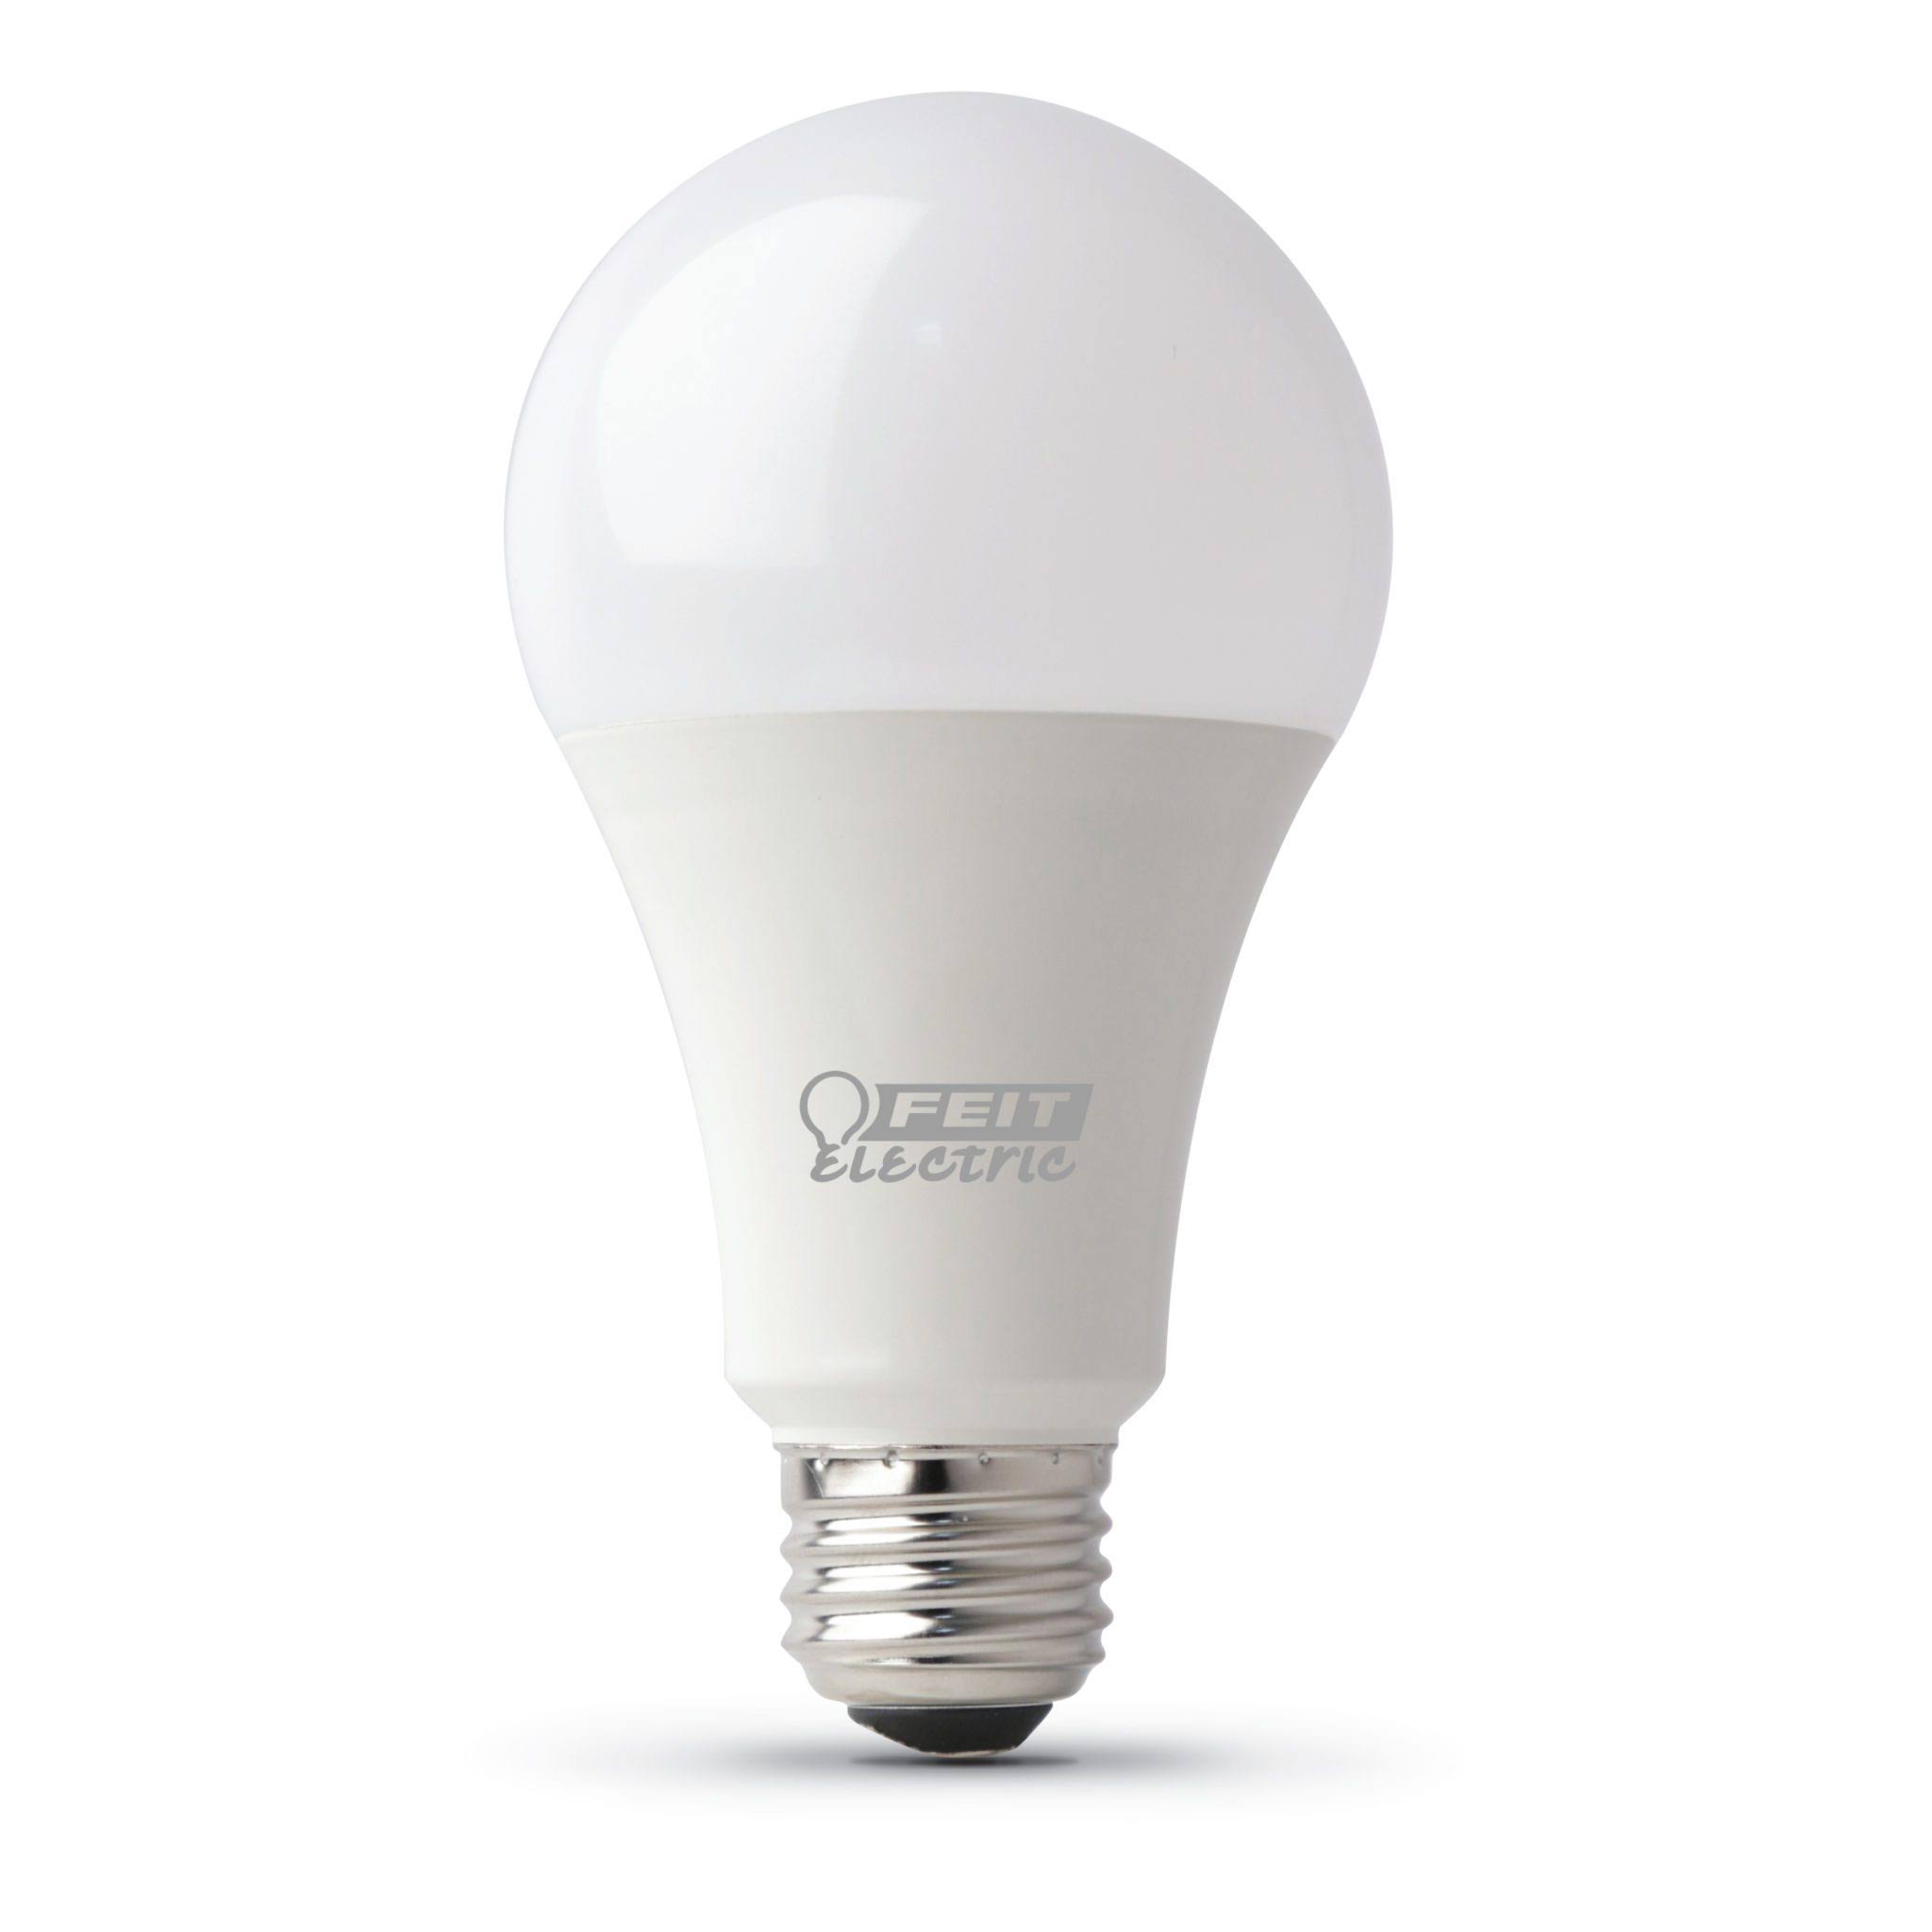 Feit Electric A21 Dimmable CEC Light Bulb - 100W Equivalent